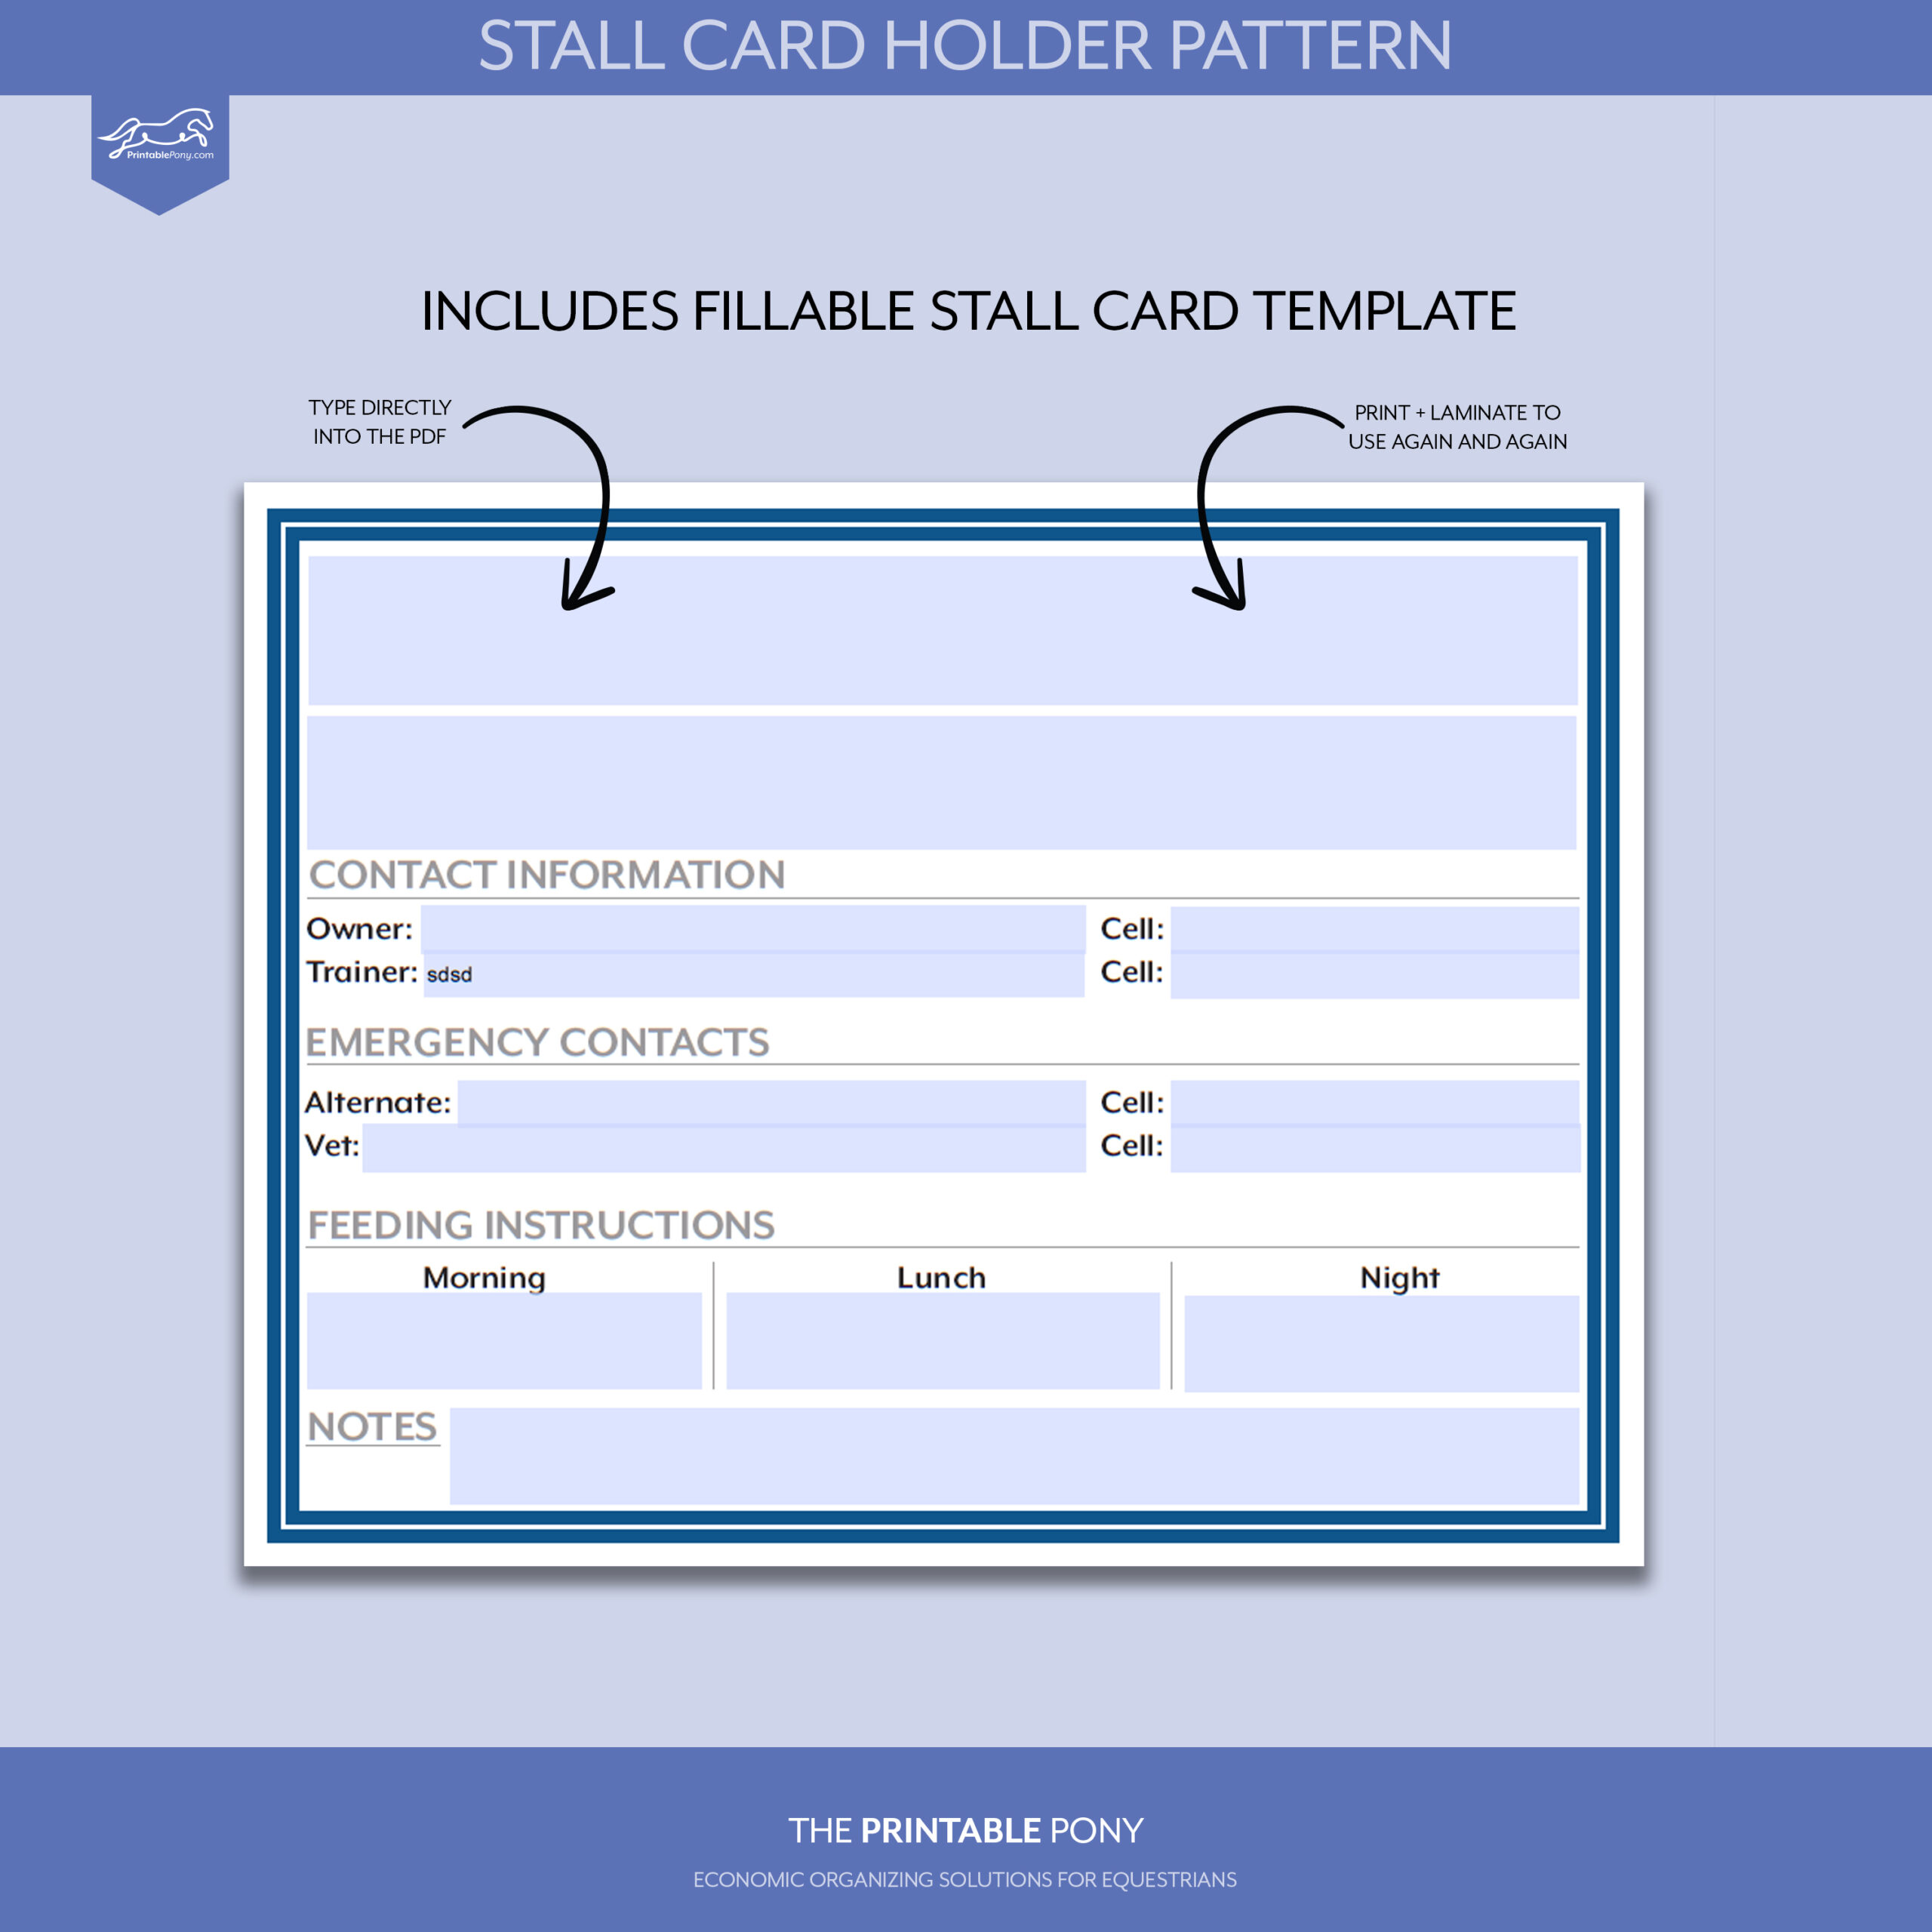 Stall Card Holder Pattern + Printable Stall Card Throughout Horse Stall Card Template